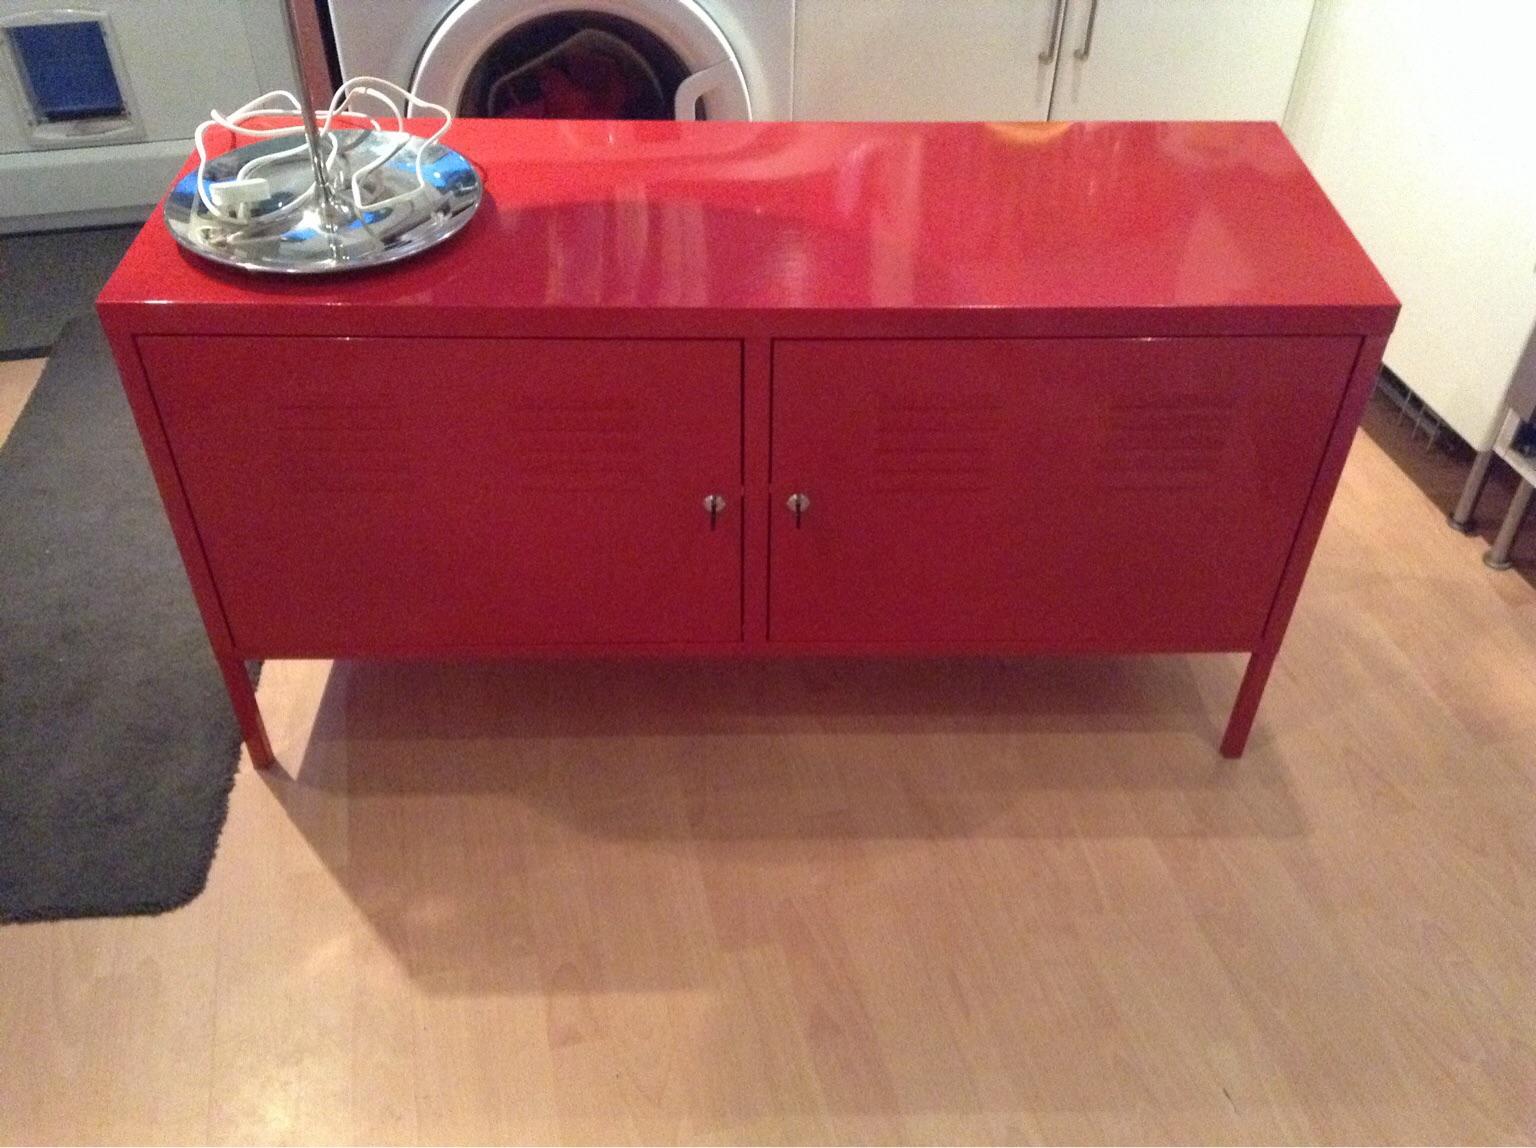 Ikea Ps Red Metal Locker Cabinet Tv Unit In Ng19 Town For 35 00